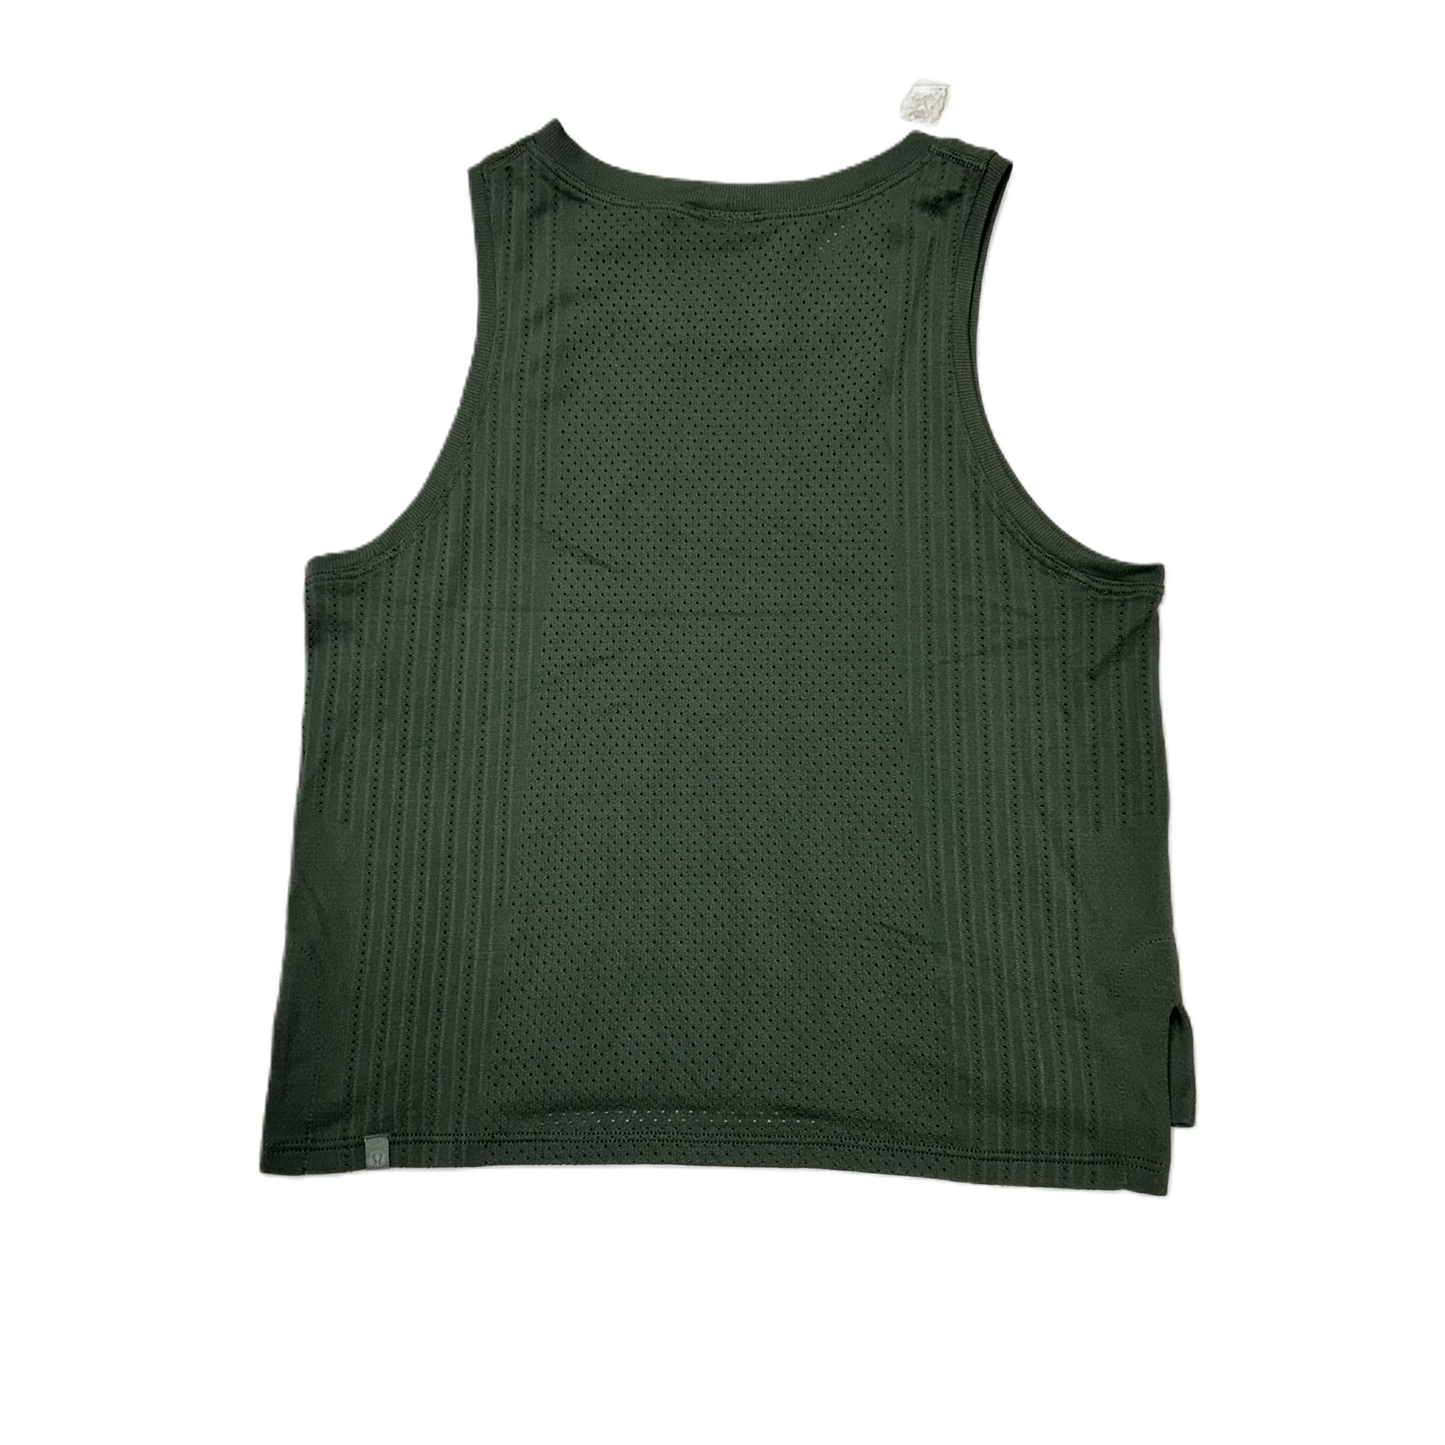 Green Athletic Tank Top By Lululemon, Size: S